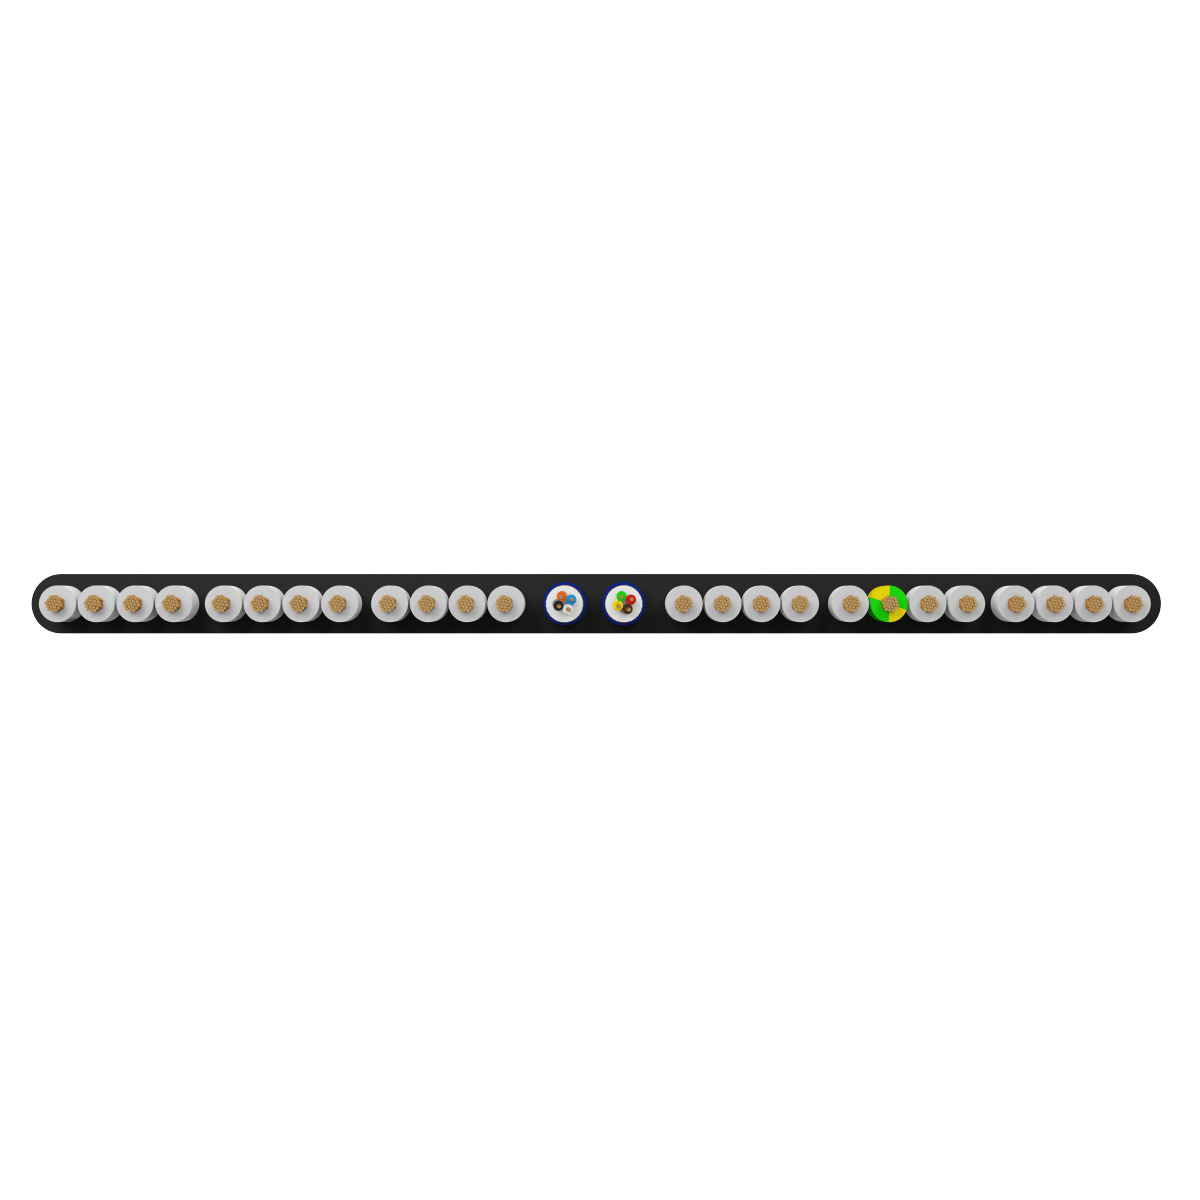 24x0.75 +2Px(4x0.22) mm² H05VVH6-F Foiled Elevator Cable